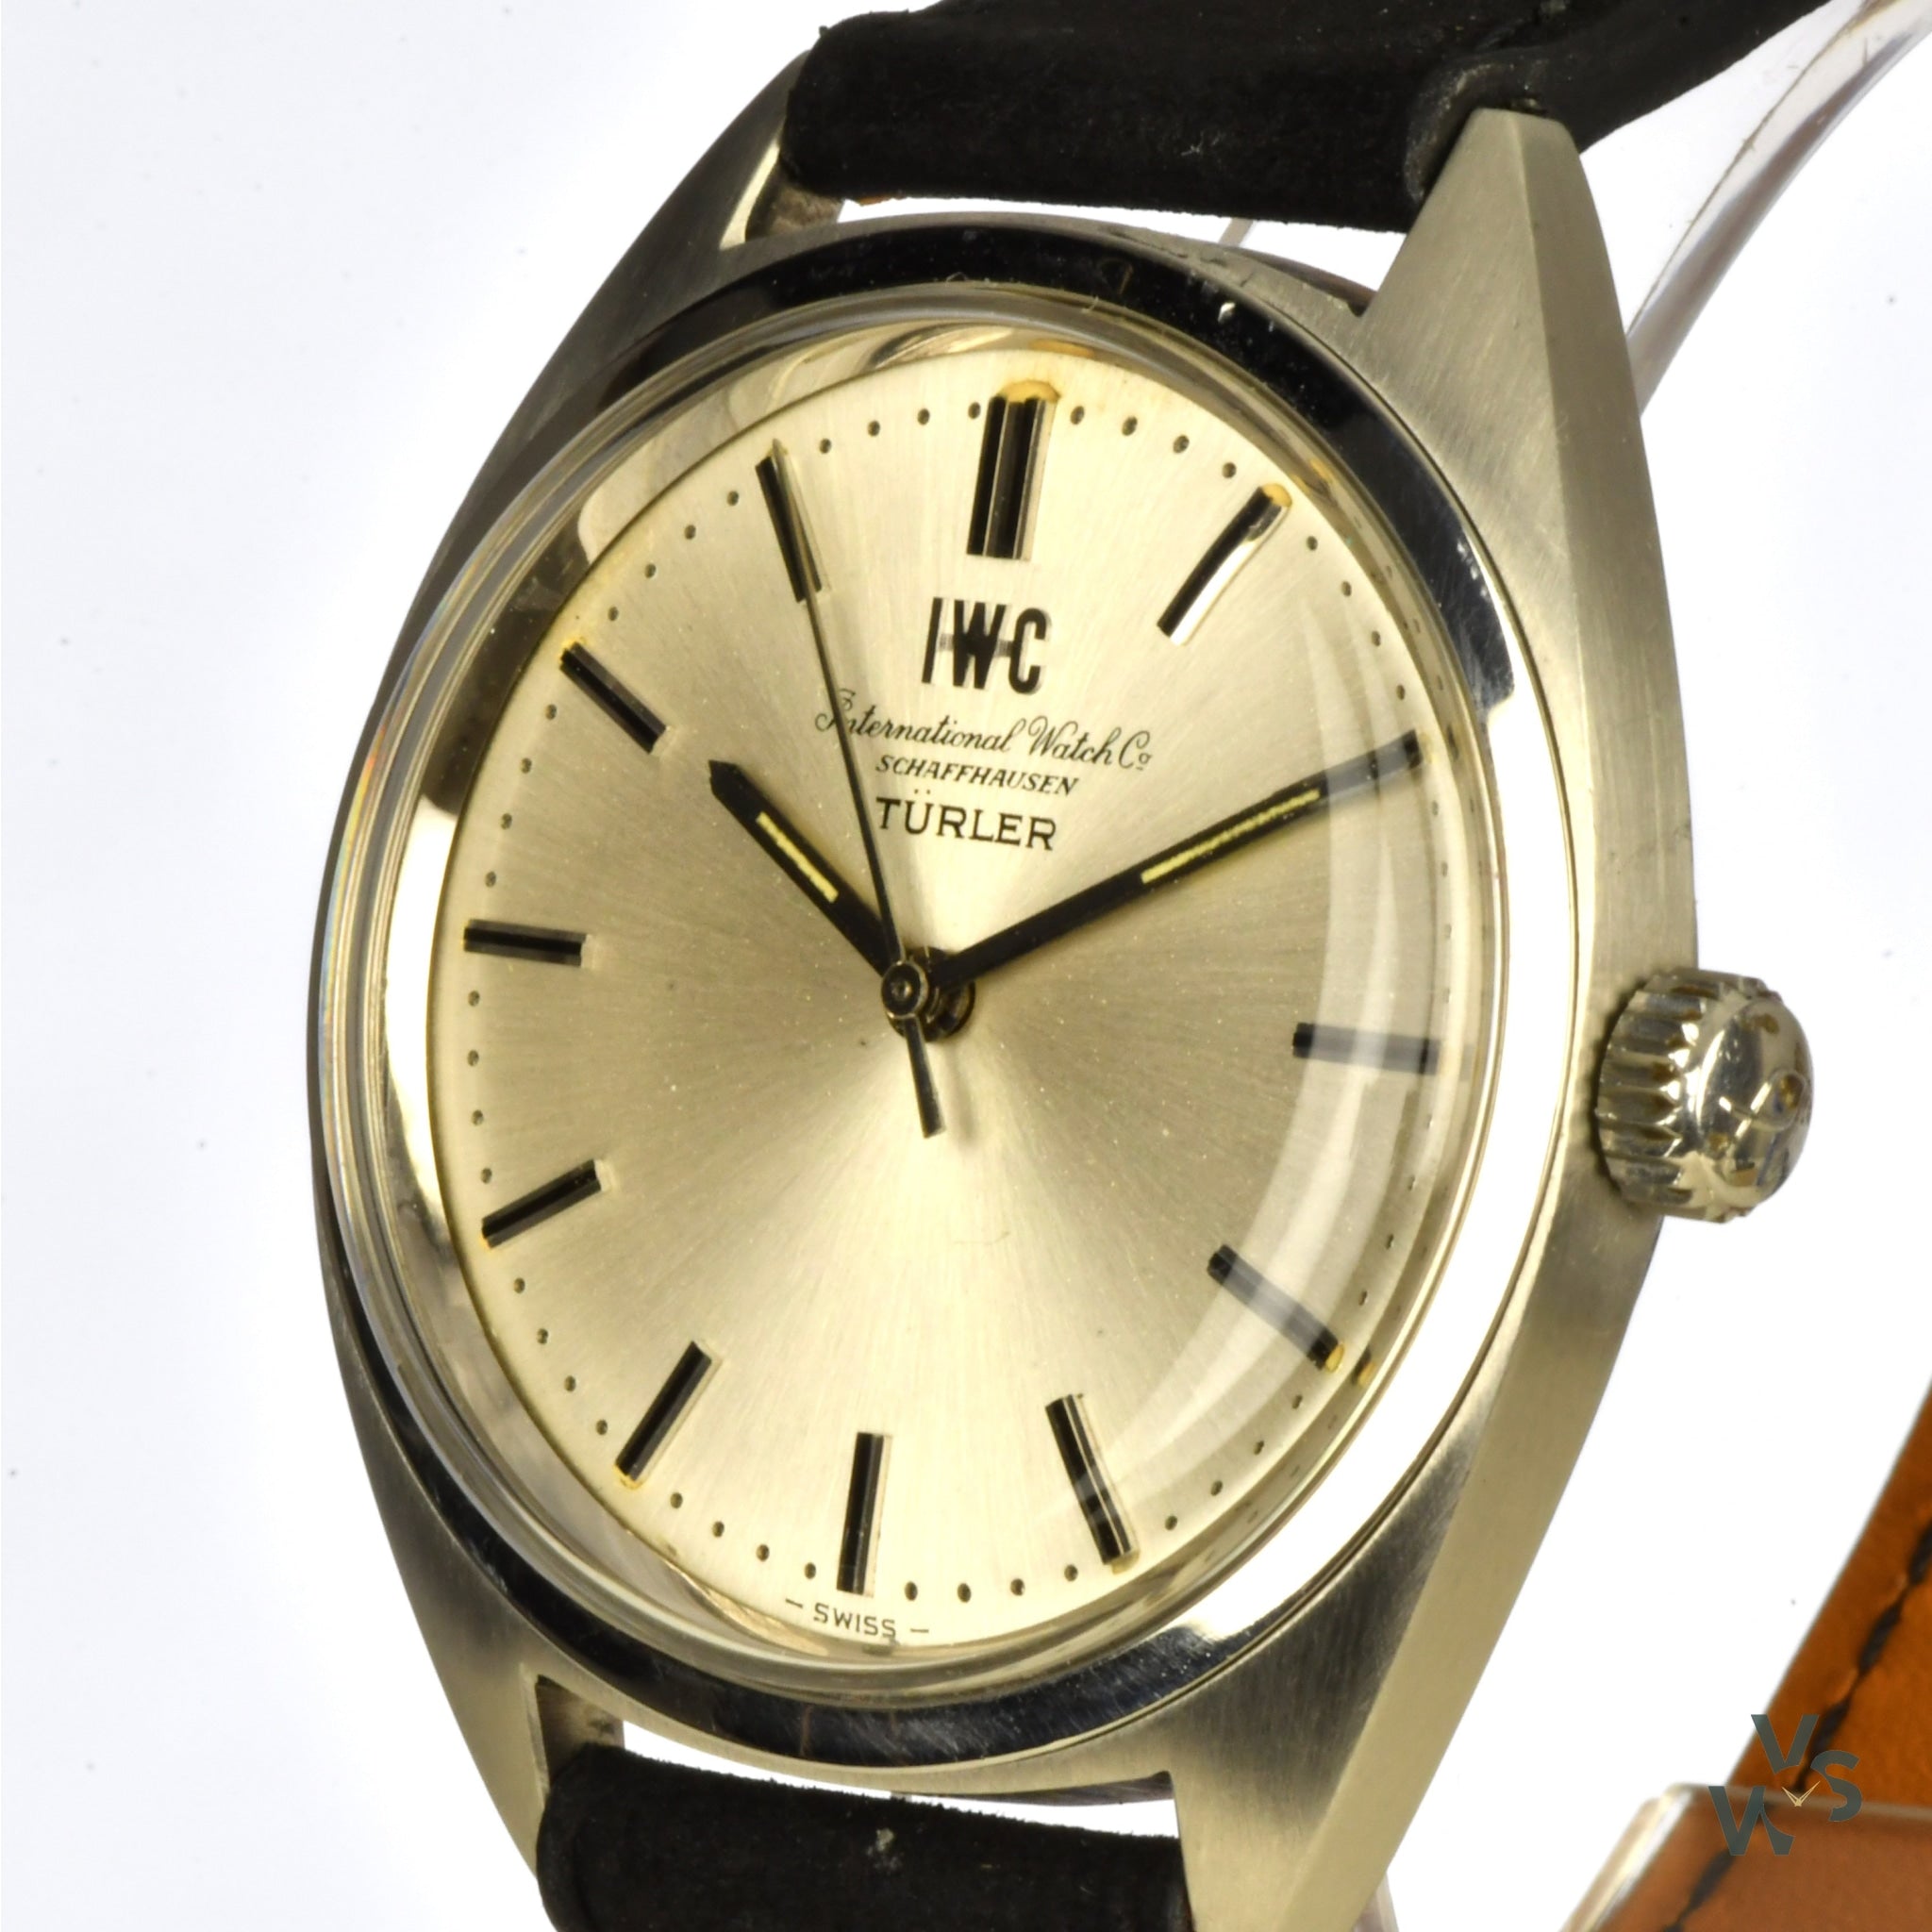 IWC Stainless Steel Watch with Calibre 89 Movement - Dual Signed Turle ...